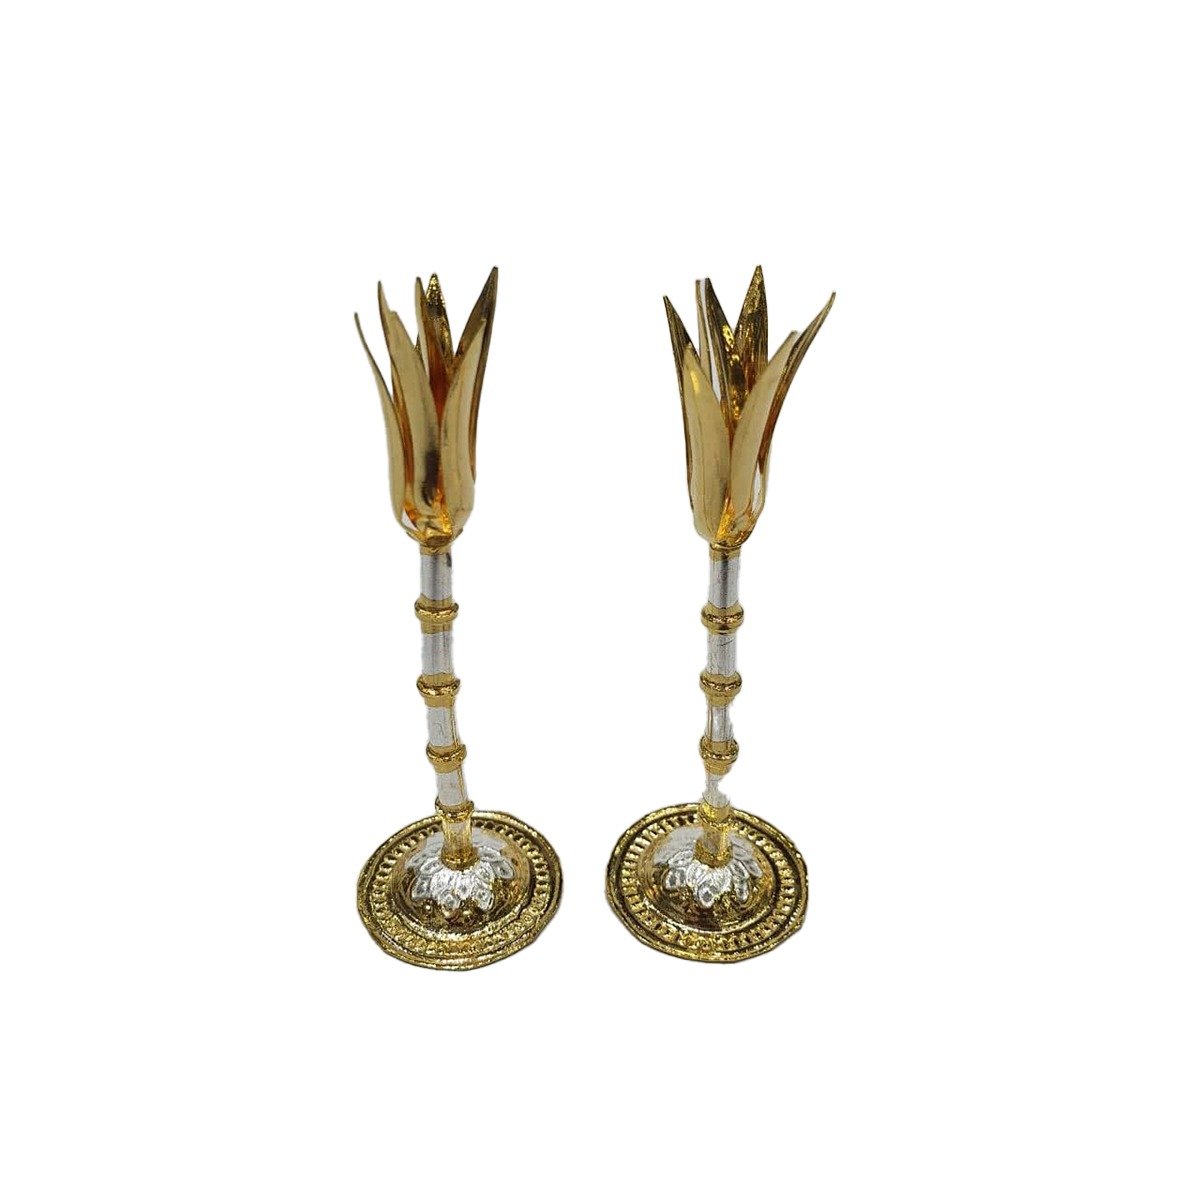 HIGH QUALITY SILVER SUGARCANE STALK FOR POOJA WITH GOLD TOUCH